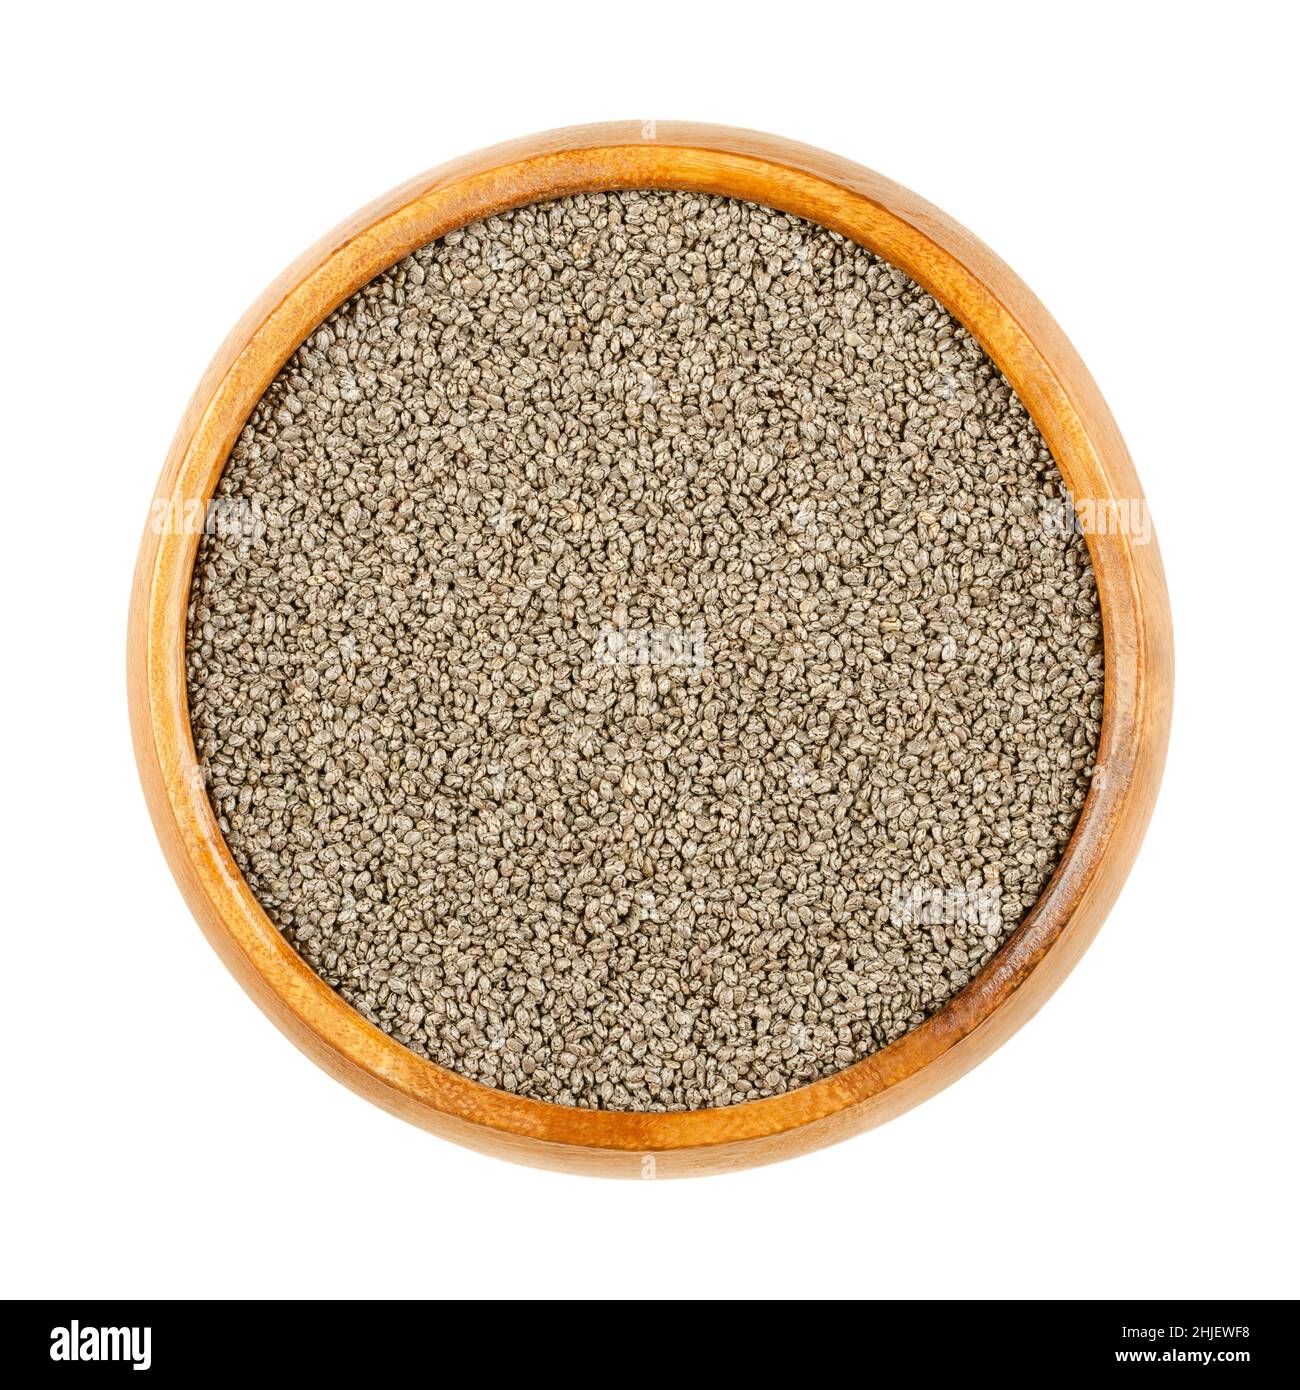 Chia seeds, in wooden bowl. Edible seeds of Salvia hispanica, flowering plant in mint family (Lamiaceae). Very hygroscopic, giving food a gel texture. Stock Photo